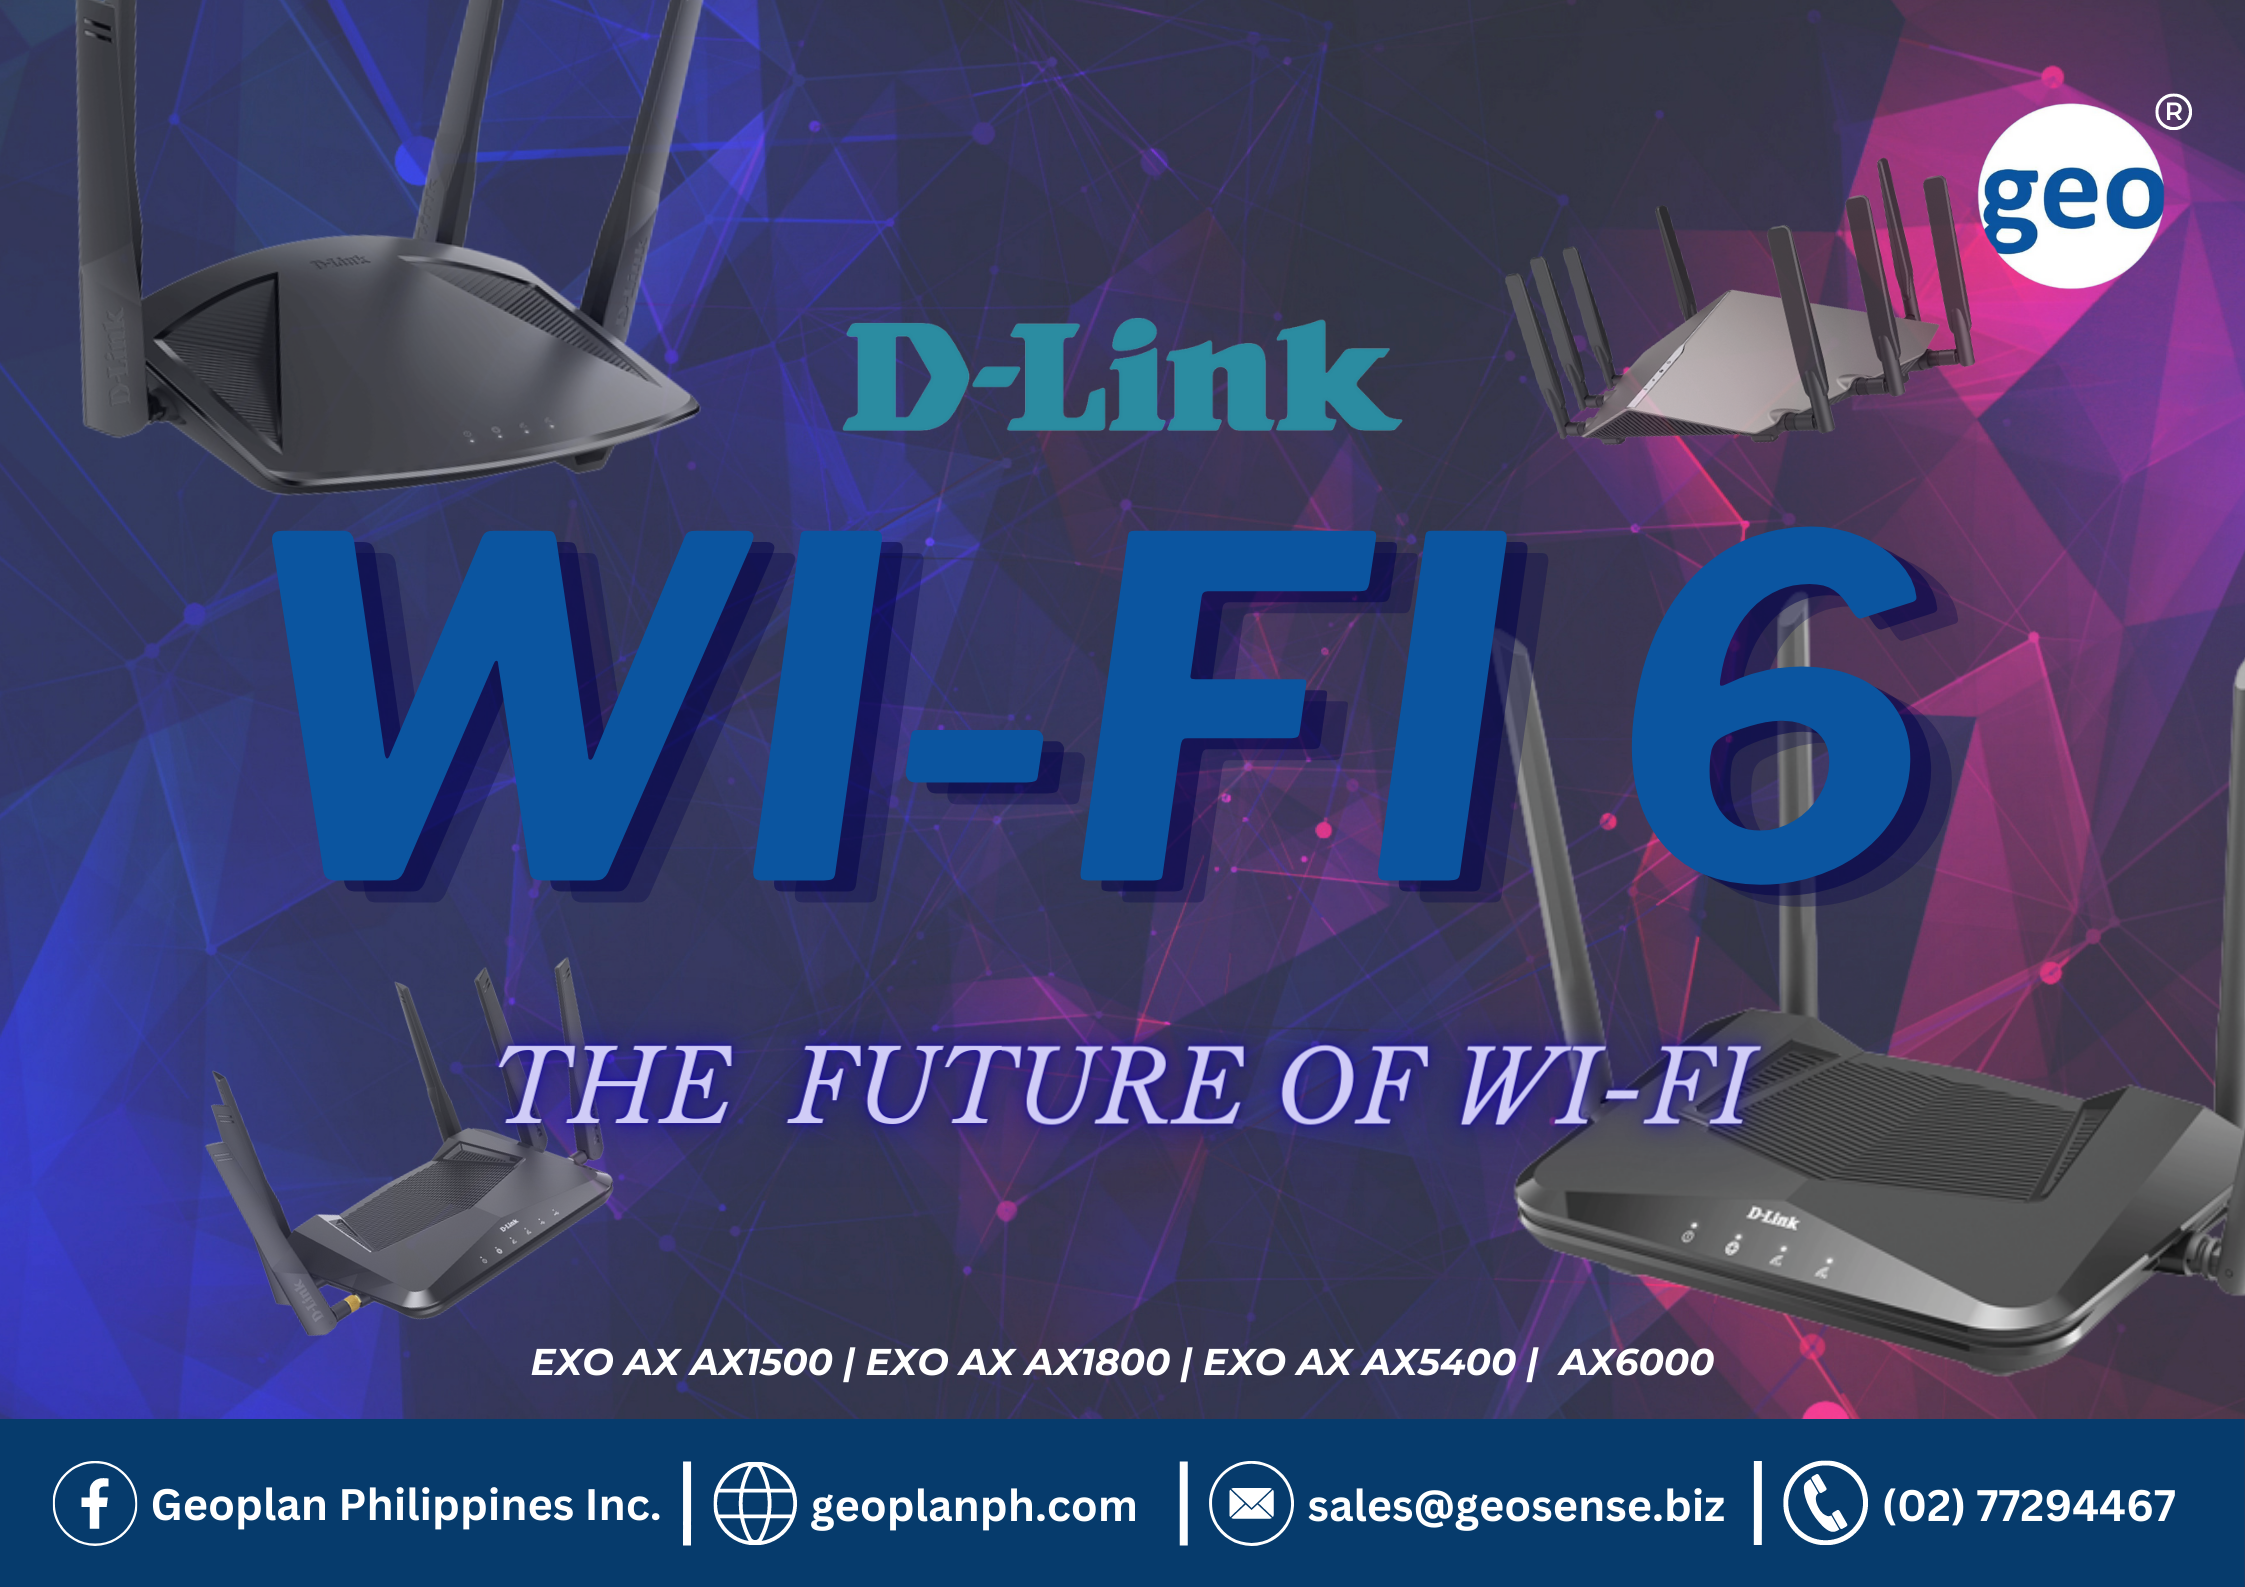 D-Link: Faster Wi-Fi is The Future